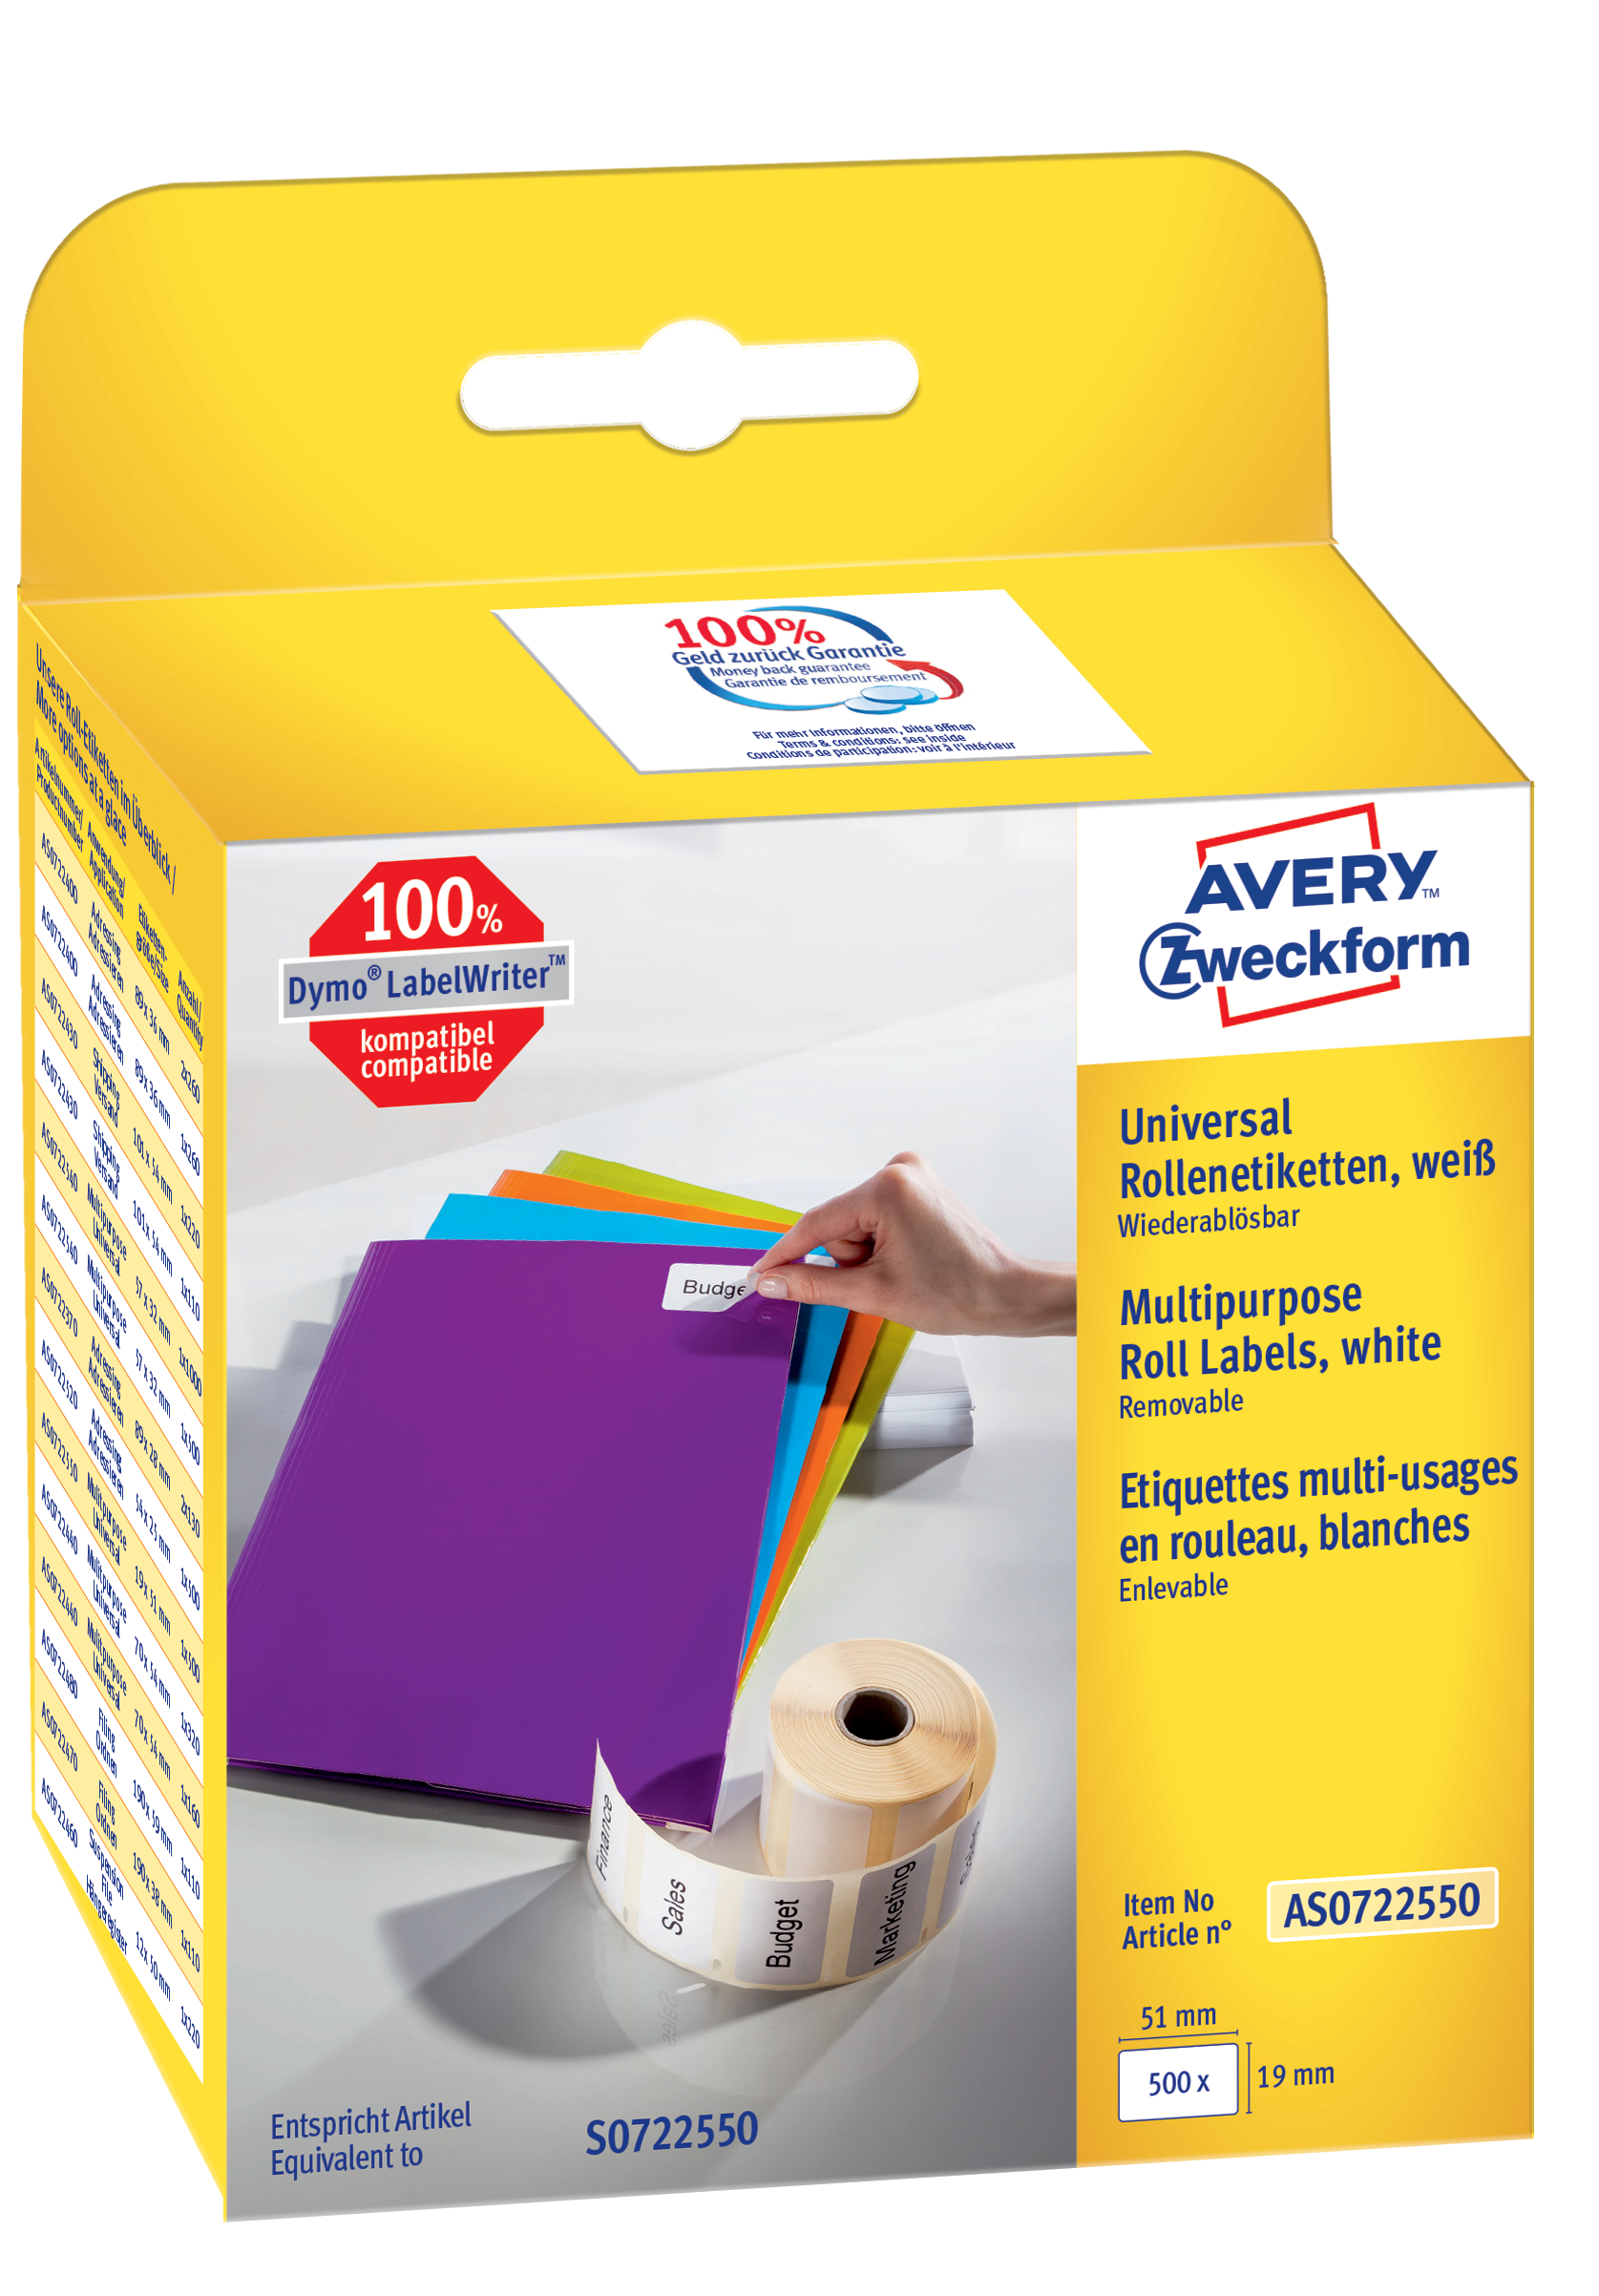 AVERY ZWECKFORM Etiquettes universell. 19x51mm AS0722550 blanc, rouleau 500 pcs.